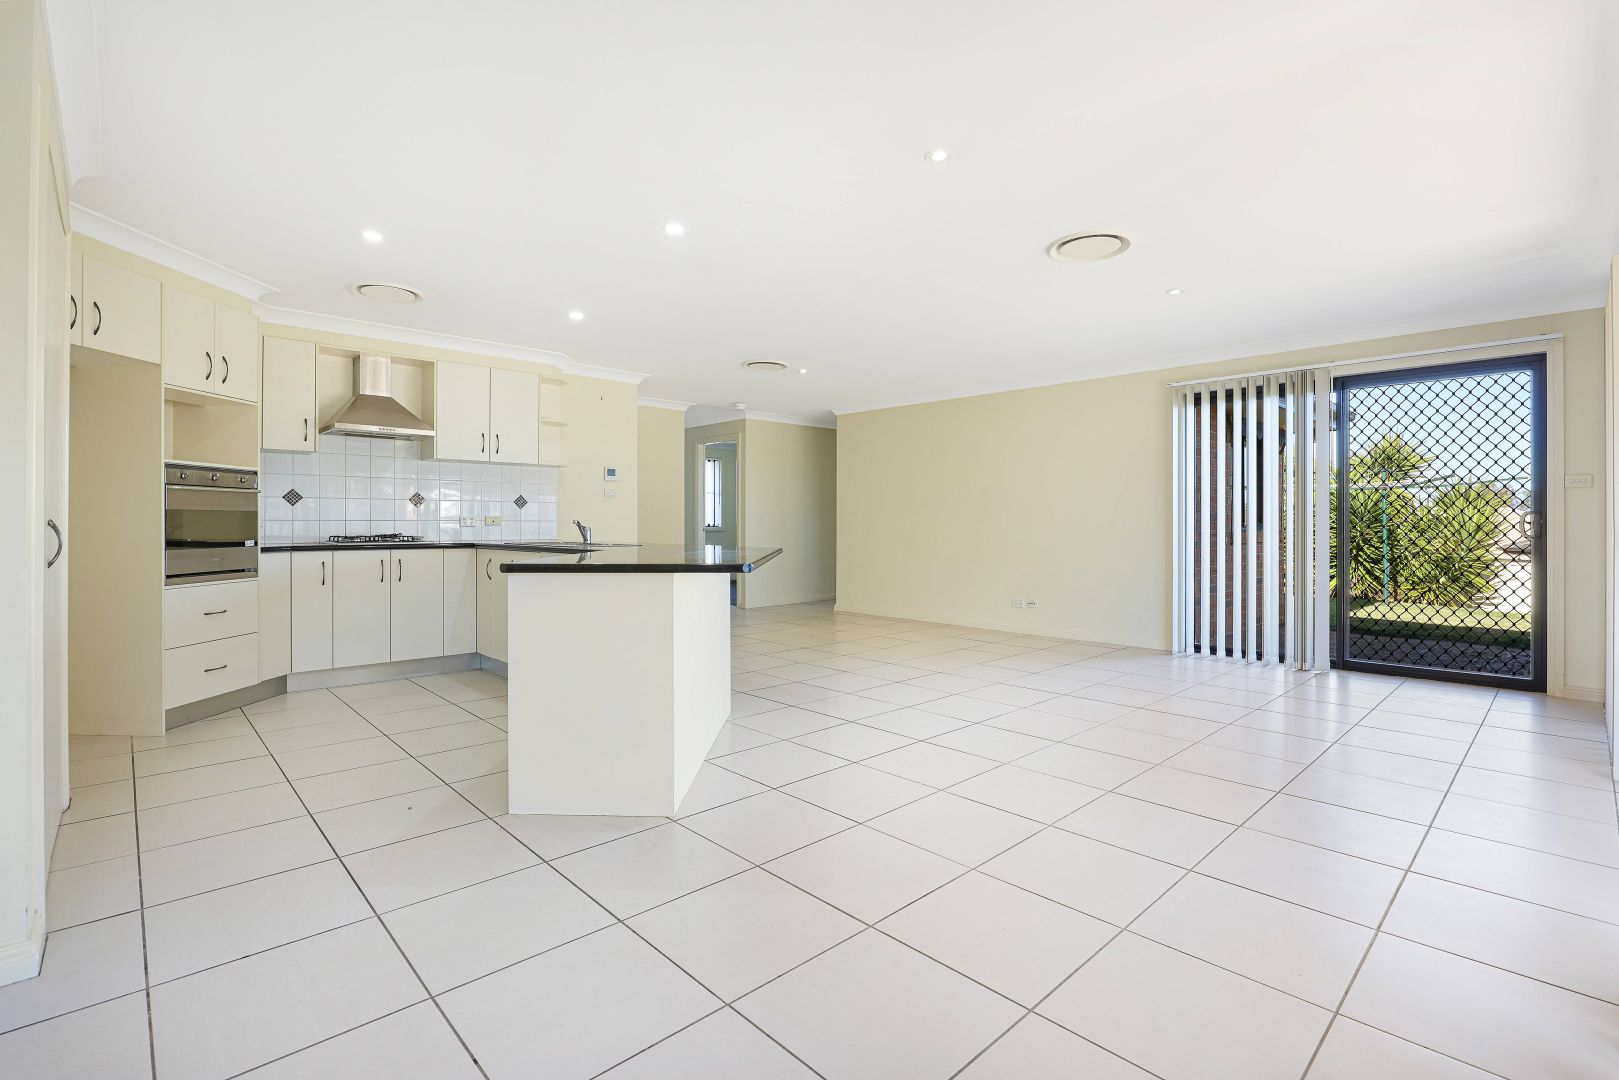 54 Milburn Road, Oxley Vale NSW 2340, Image 1